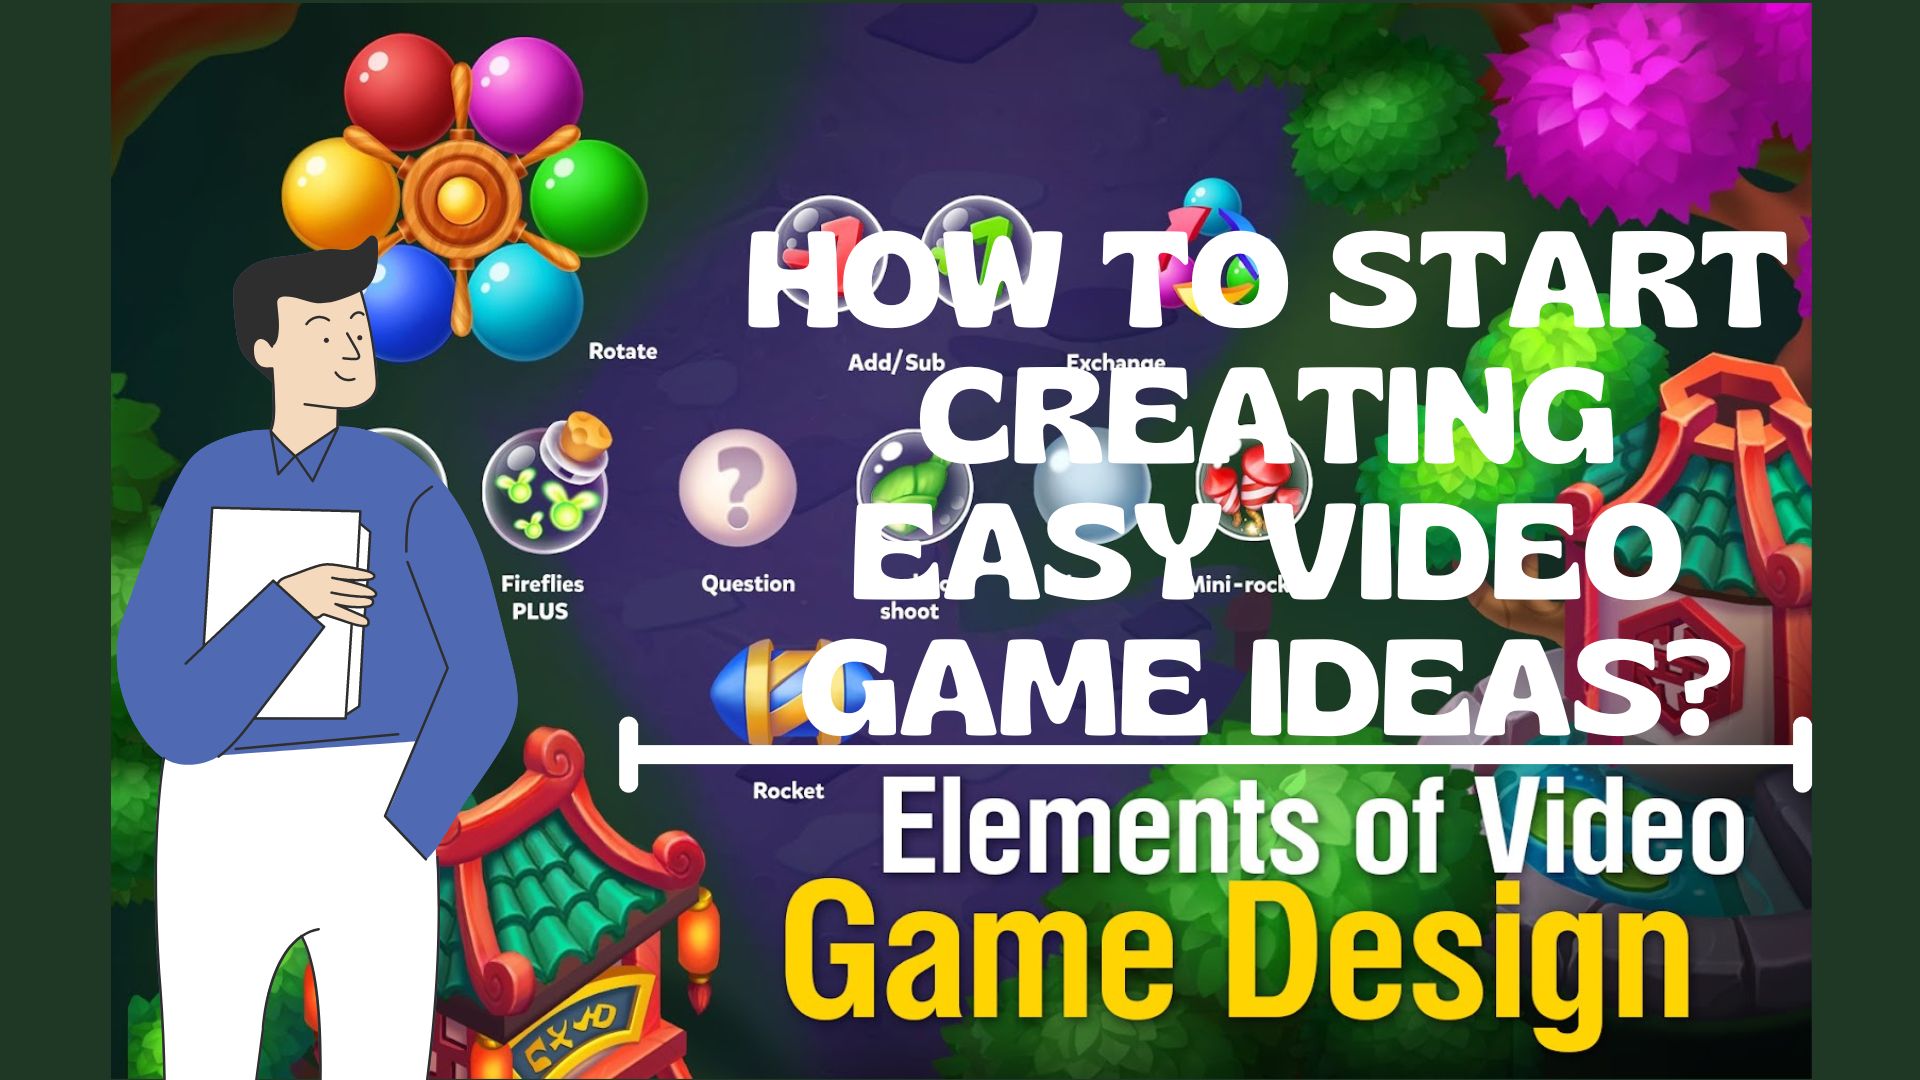 How to start creating easy video game ideas?